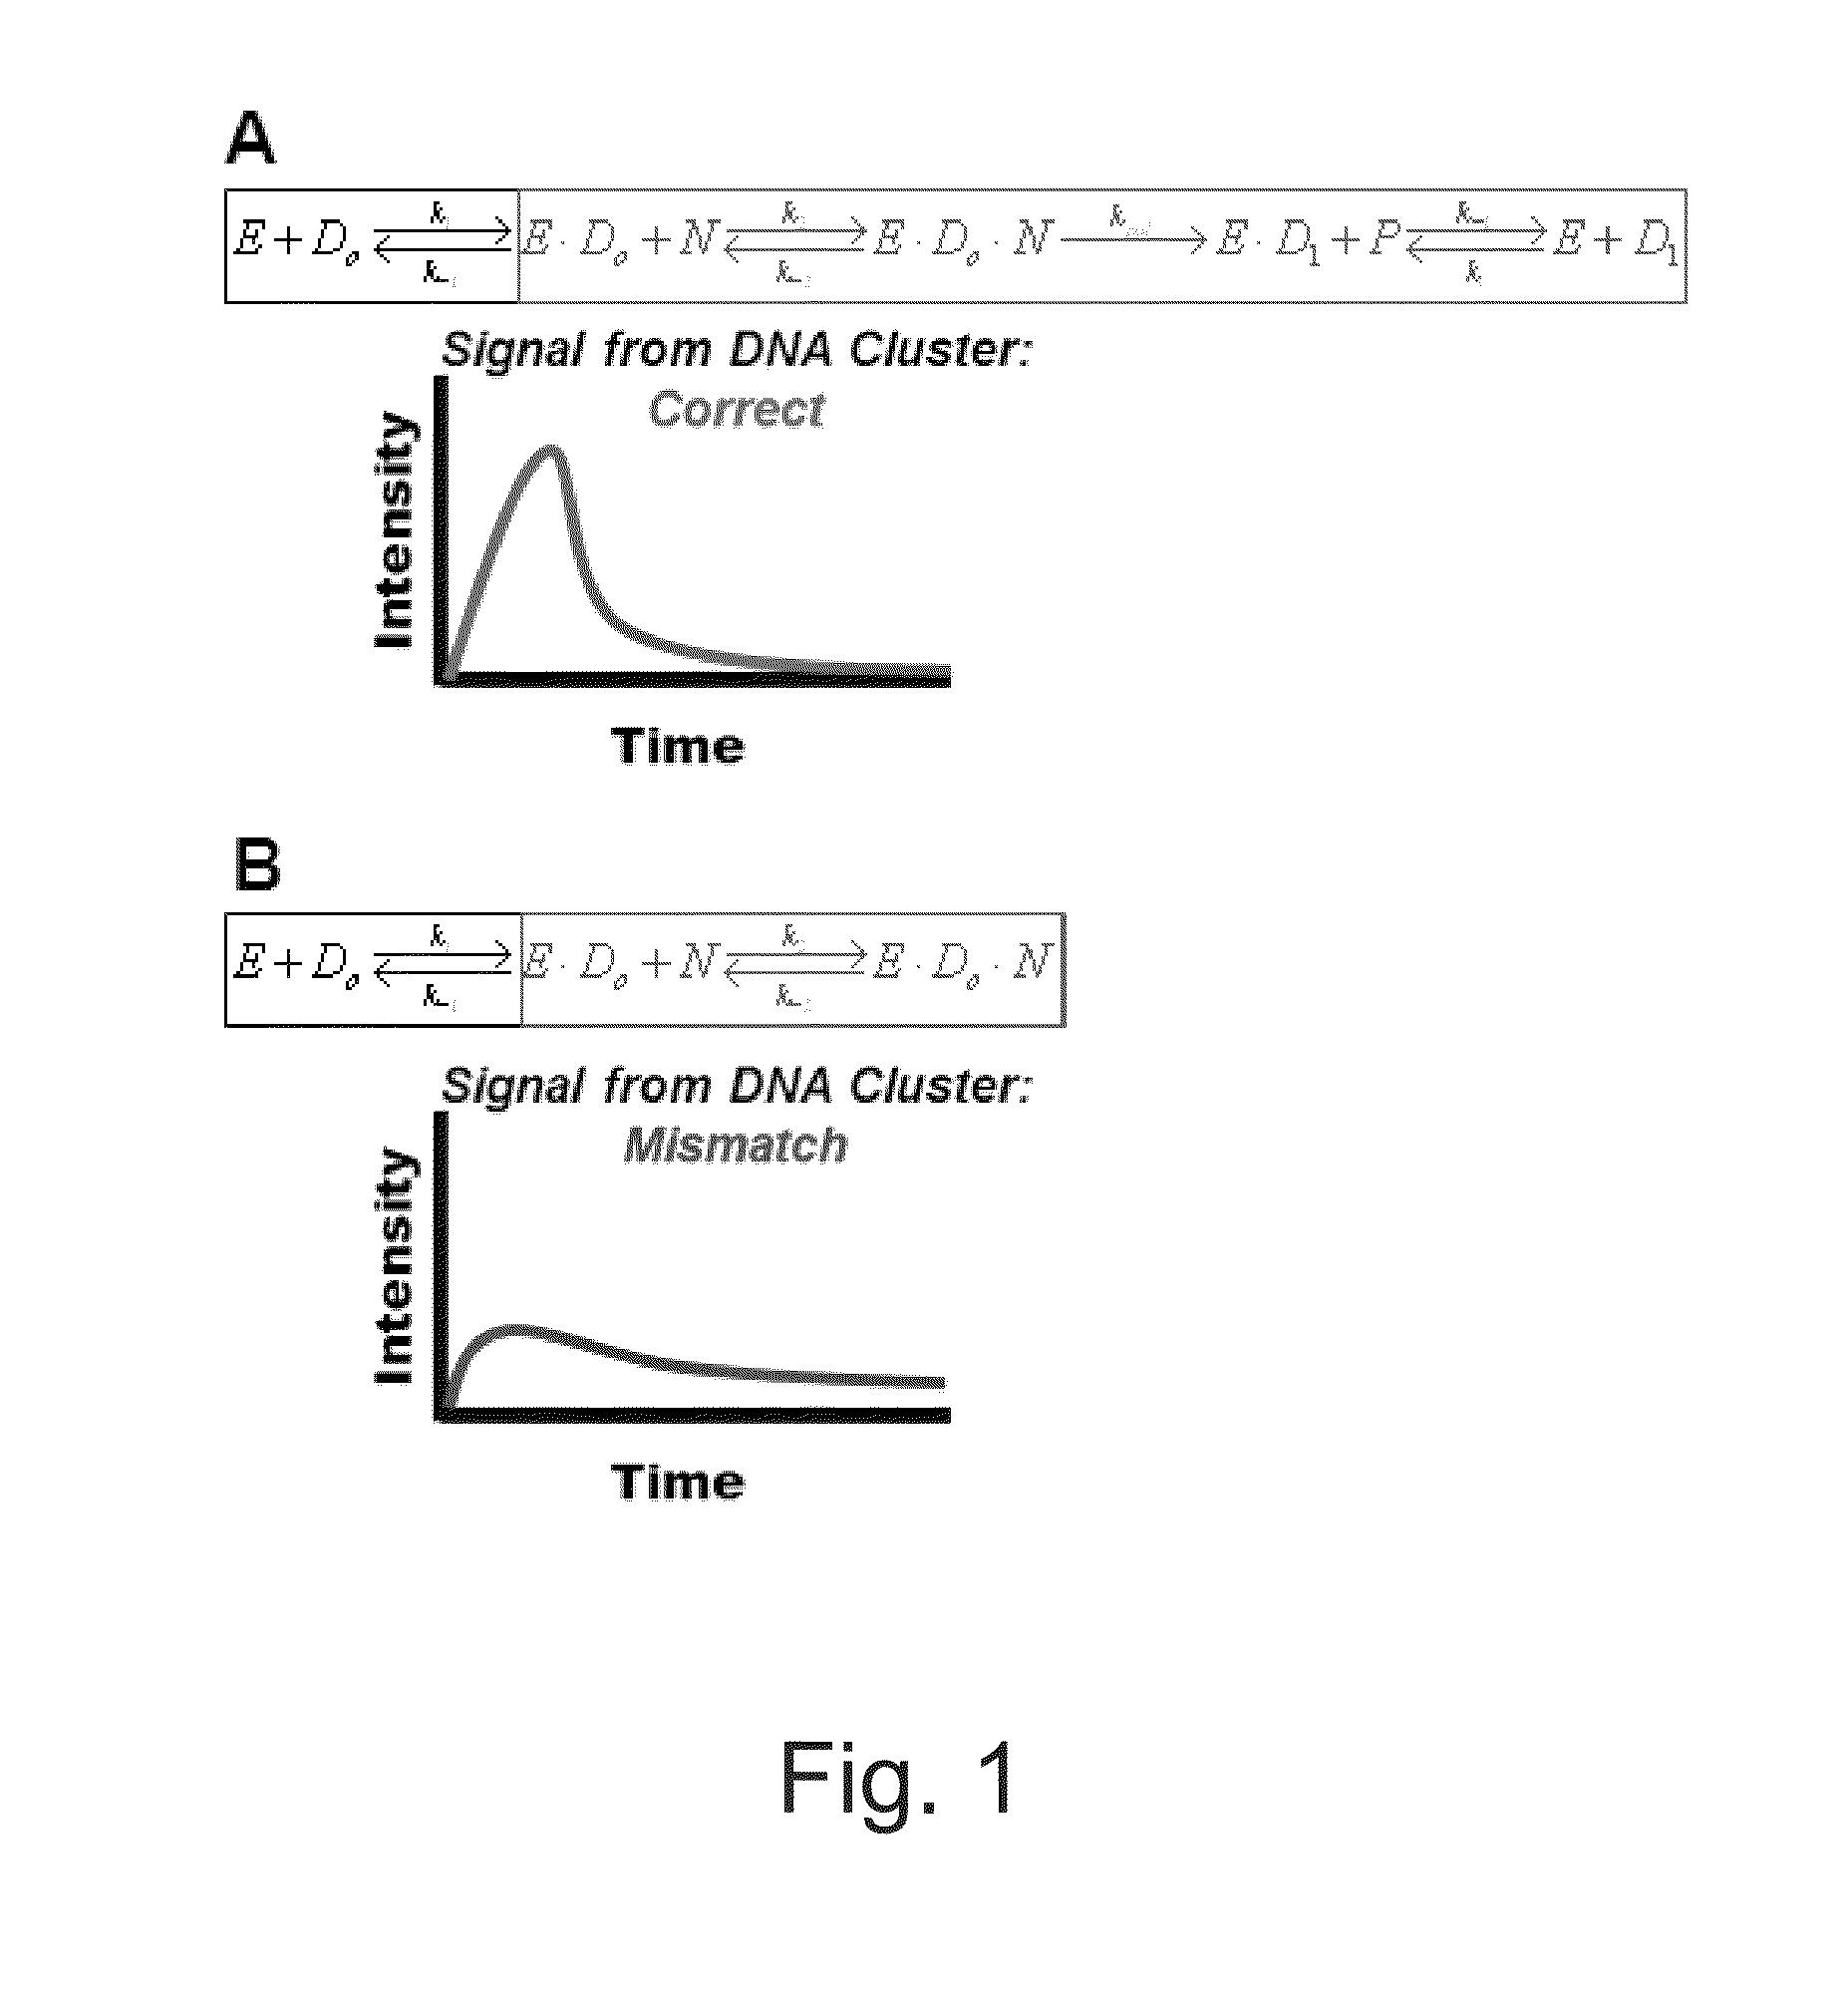 Apparatus and methods for kinetic analysis and determination of nucleic acid sequences